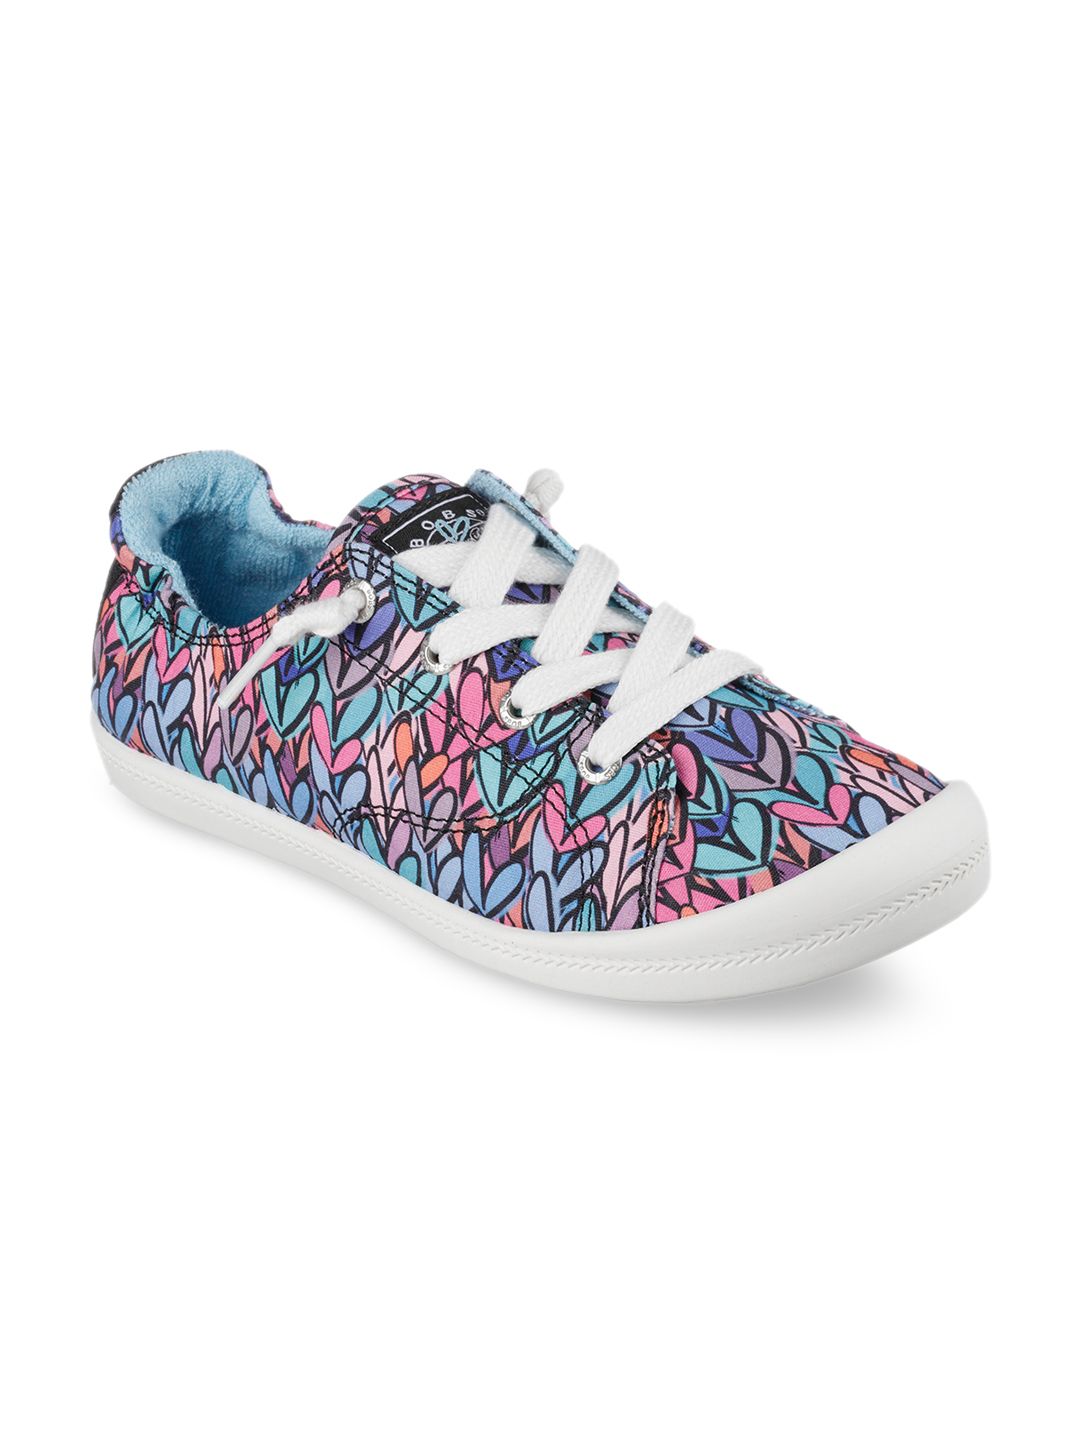 Skechers Women Black DOWN WITH LOVE Woven Design Canvas Sneakers Price in India